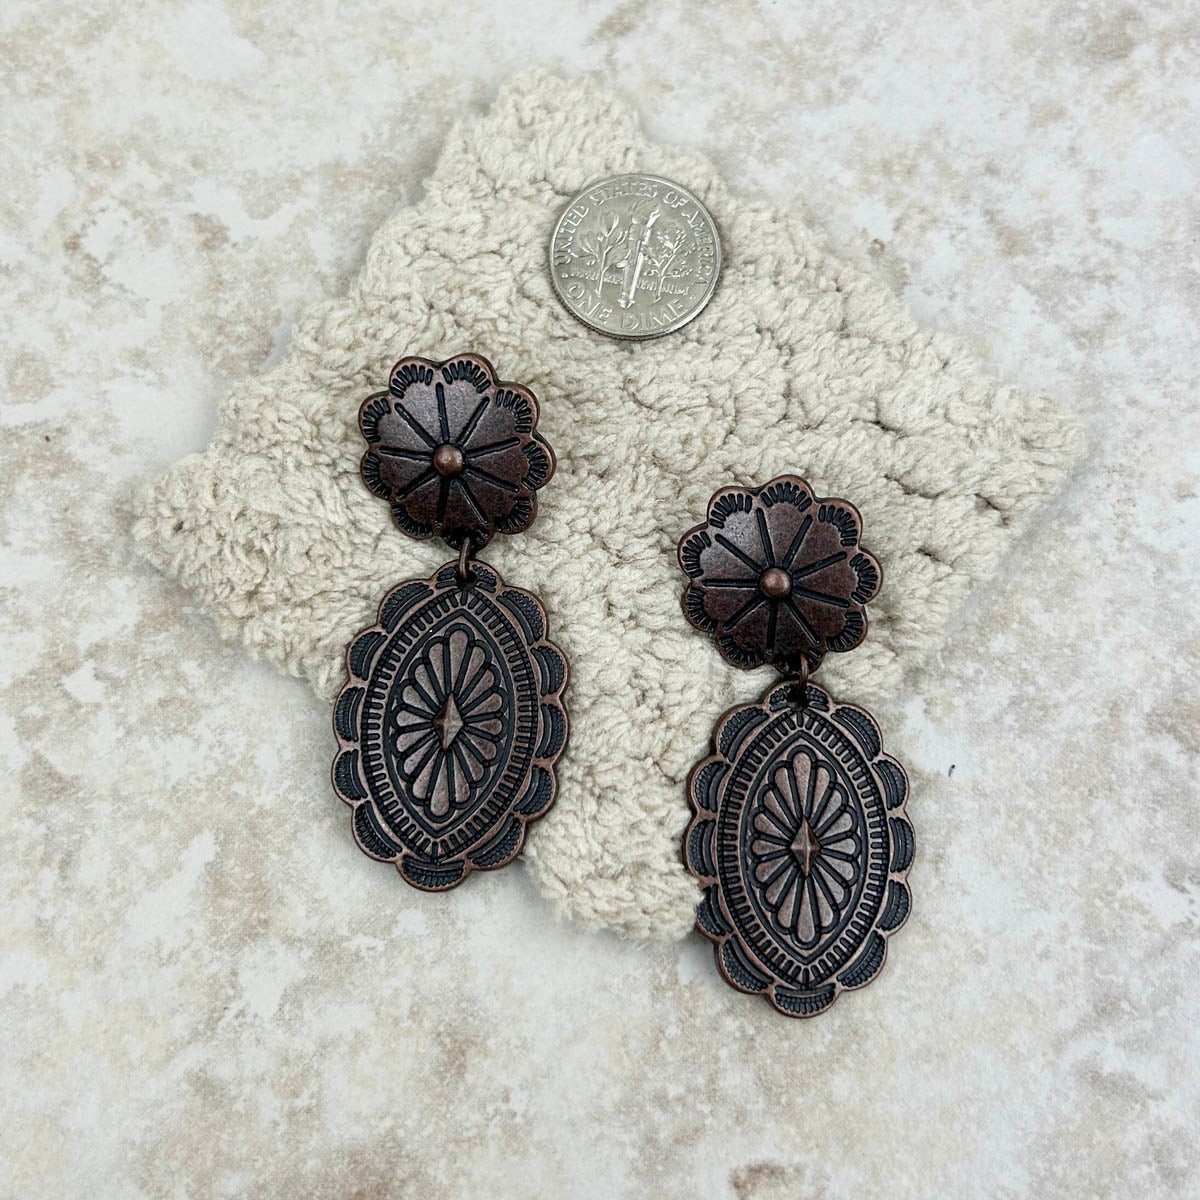 Antique silver oval concho Earrings